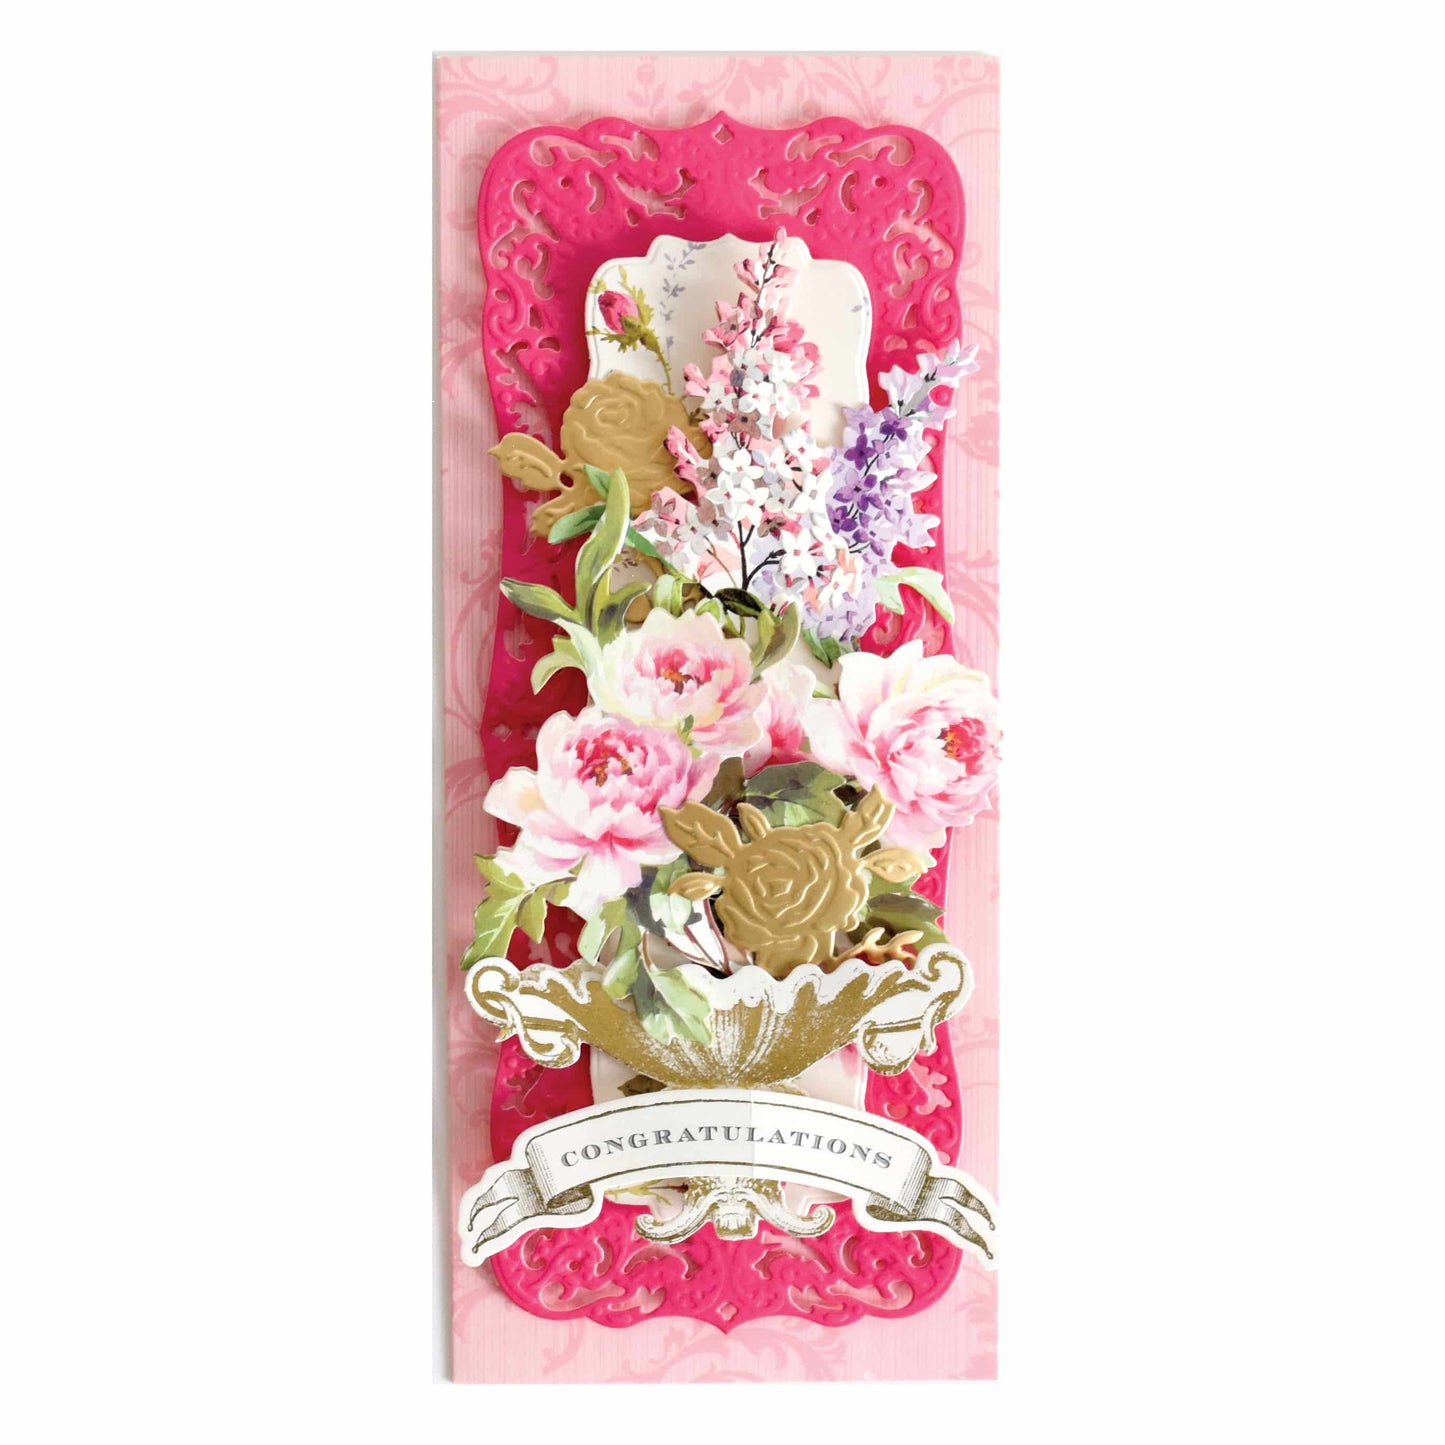 a pink card with flowers on it.